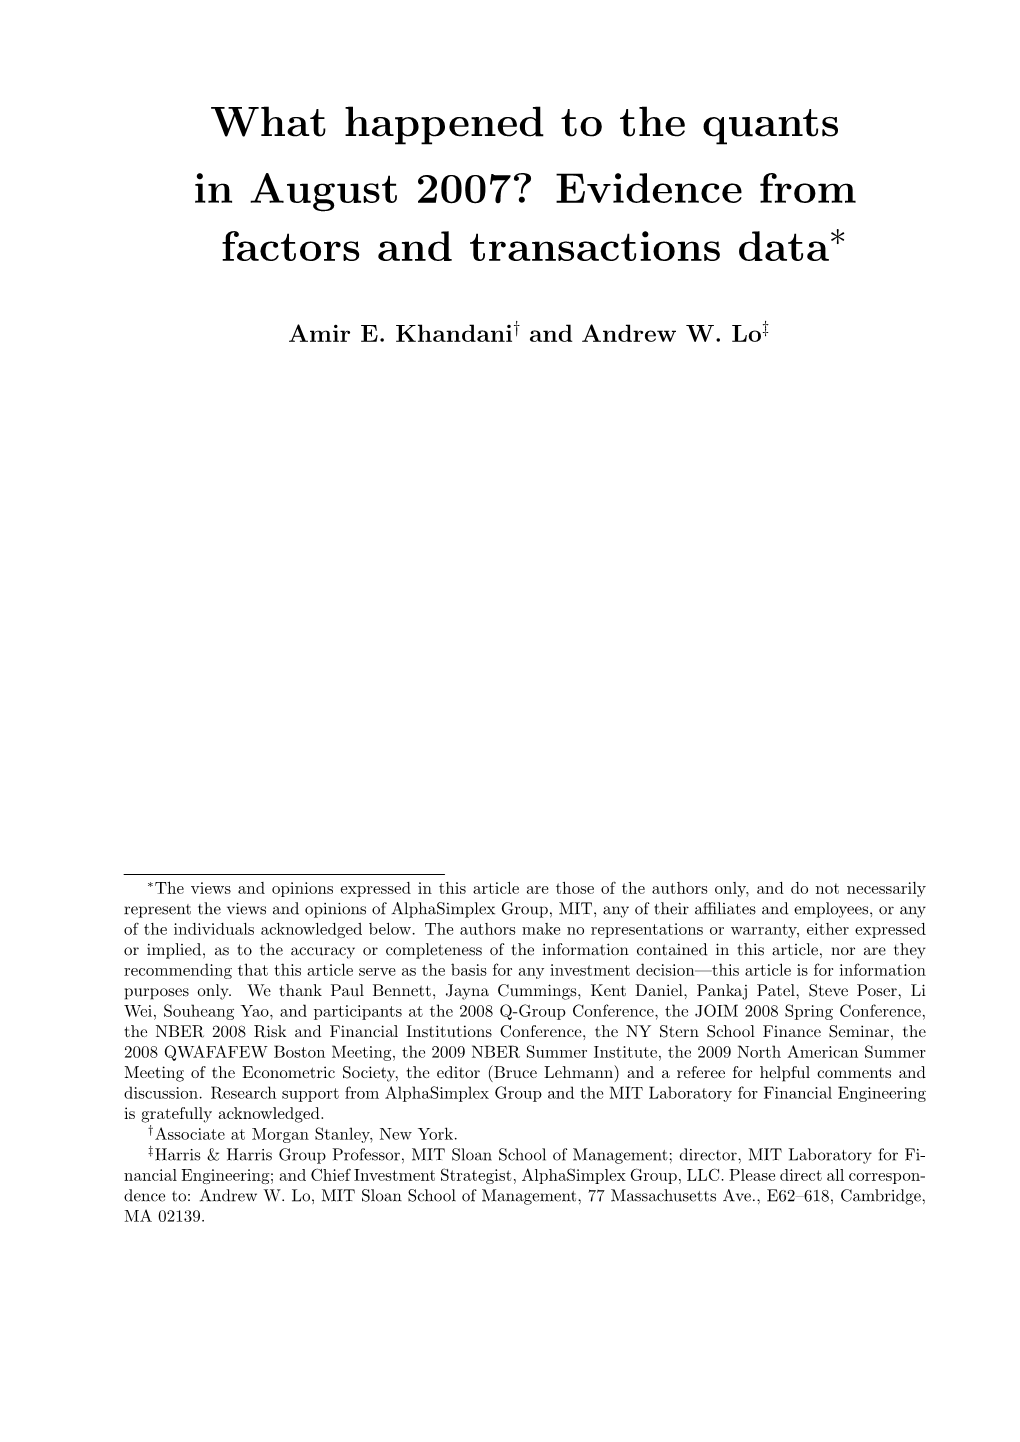 What Happened to the Quants in August 2007? Evidence from Factors and Transactions Data∗